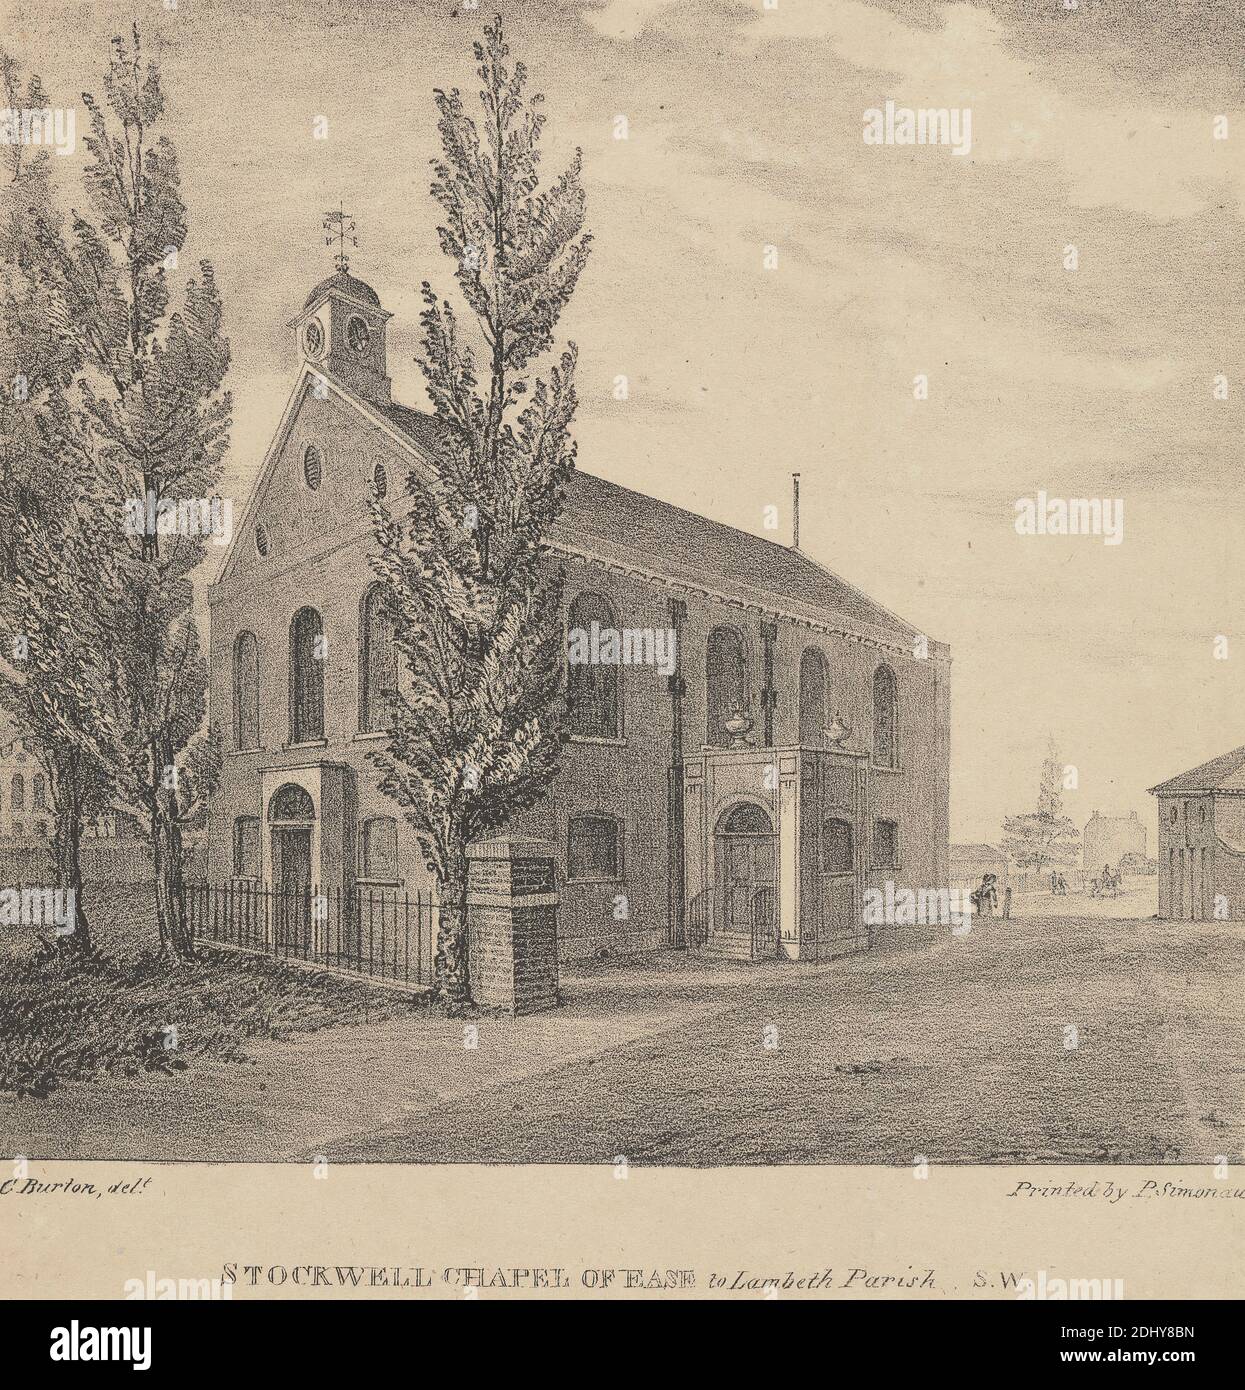 Stockwell Chapel of Ease to Lambeth Parish South West, unknown artist, nineteenth century, after unknown artist, ( C. Burton ), undated, Lithograph, Sheet: 8 1/4 x 7 3/4in. (21 x 19.7cm Stock Photo